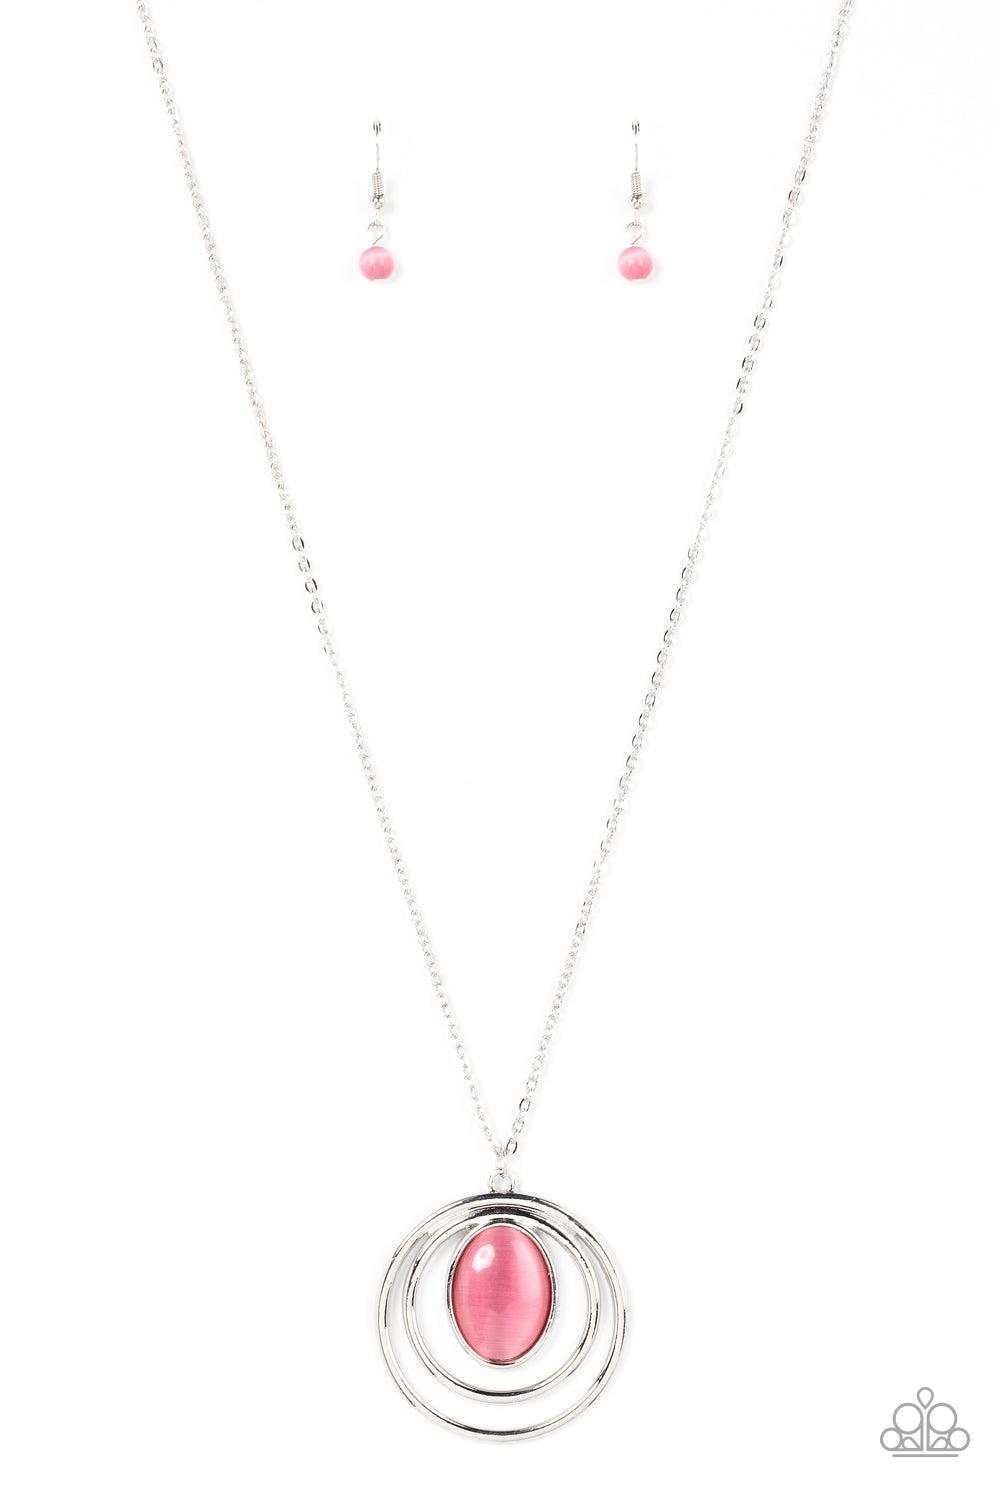 Epicenter of Elegance Pink Cat's Eye Stone Necklace - Paparazzi Accessories- lightbox - CarasShop.com - $5 Jewelry by Cara Jewels